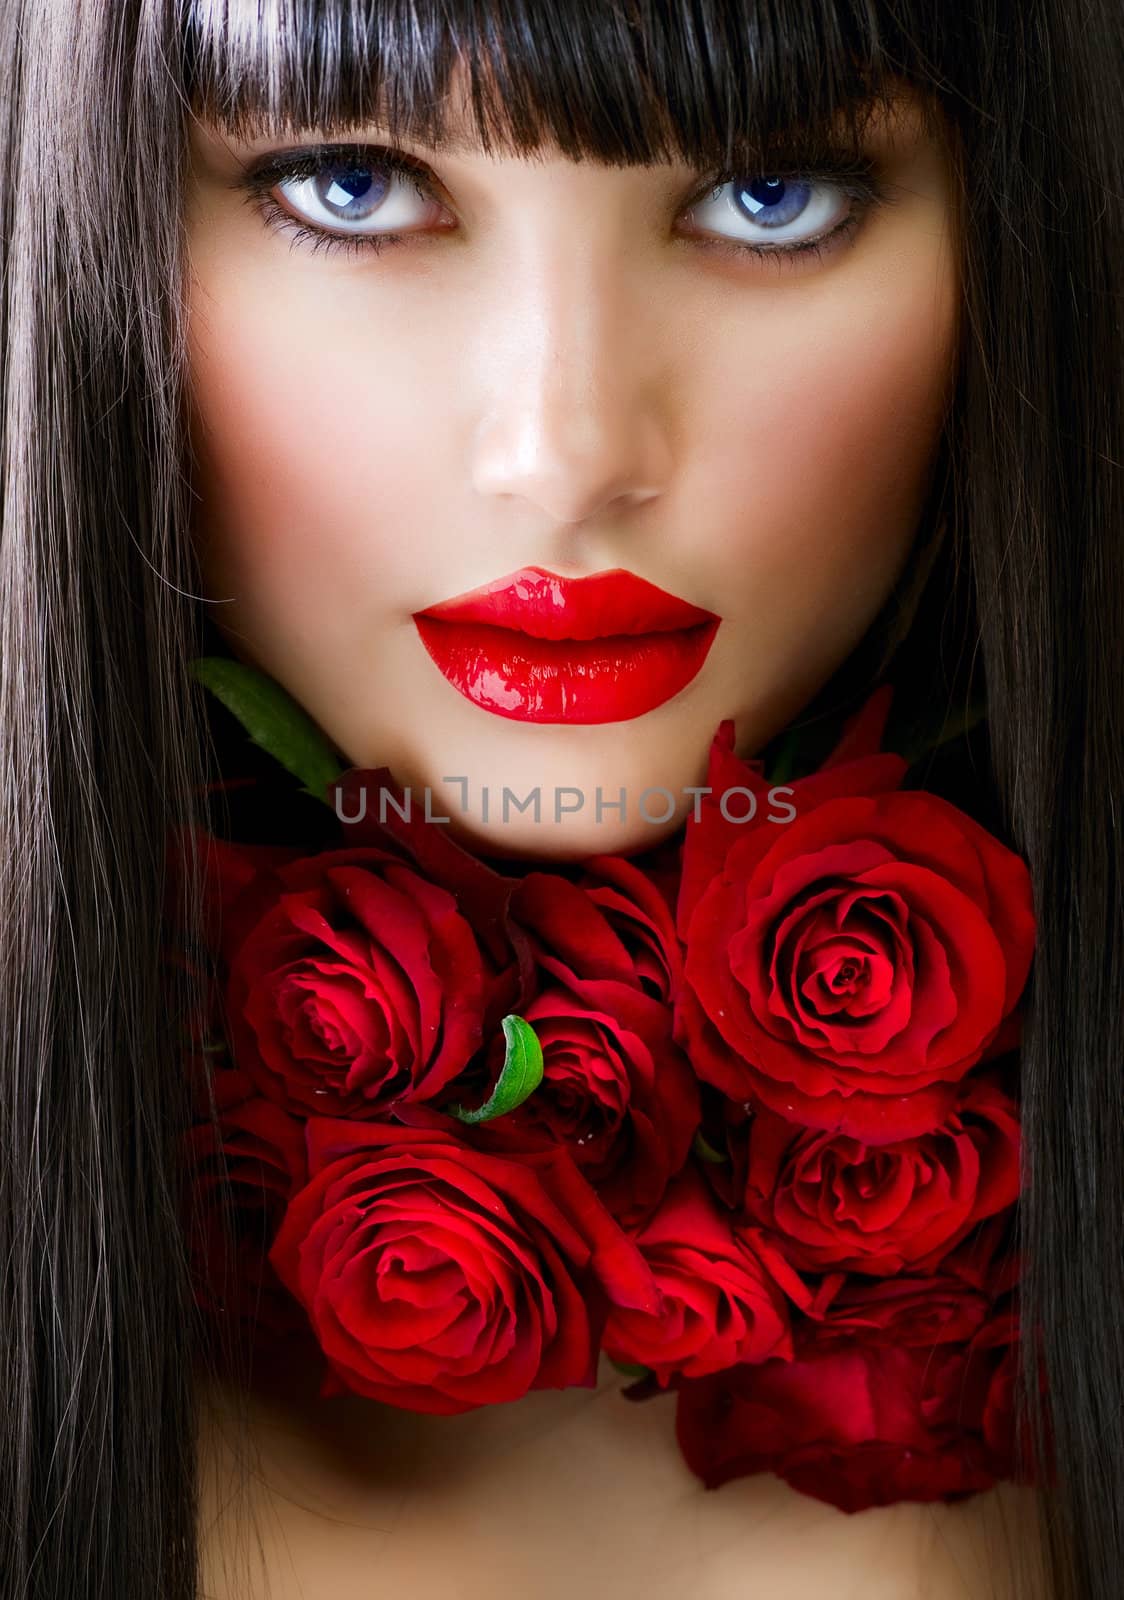 Beautiful Fashion Girl with Roses by SubbotinaA